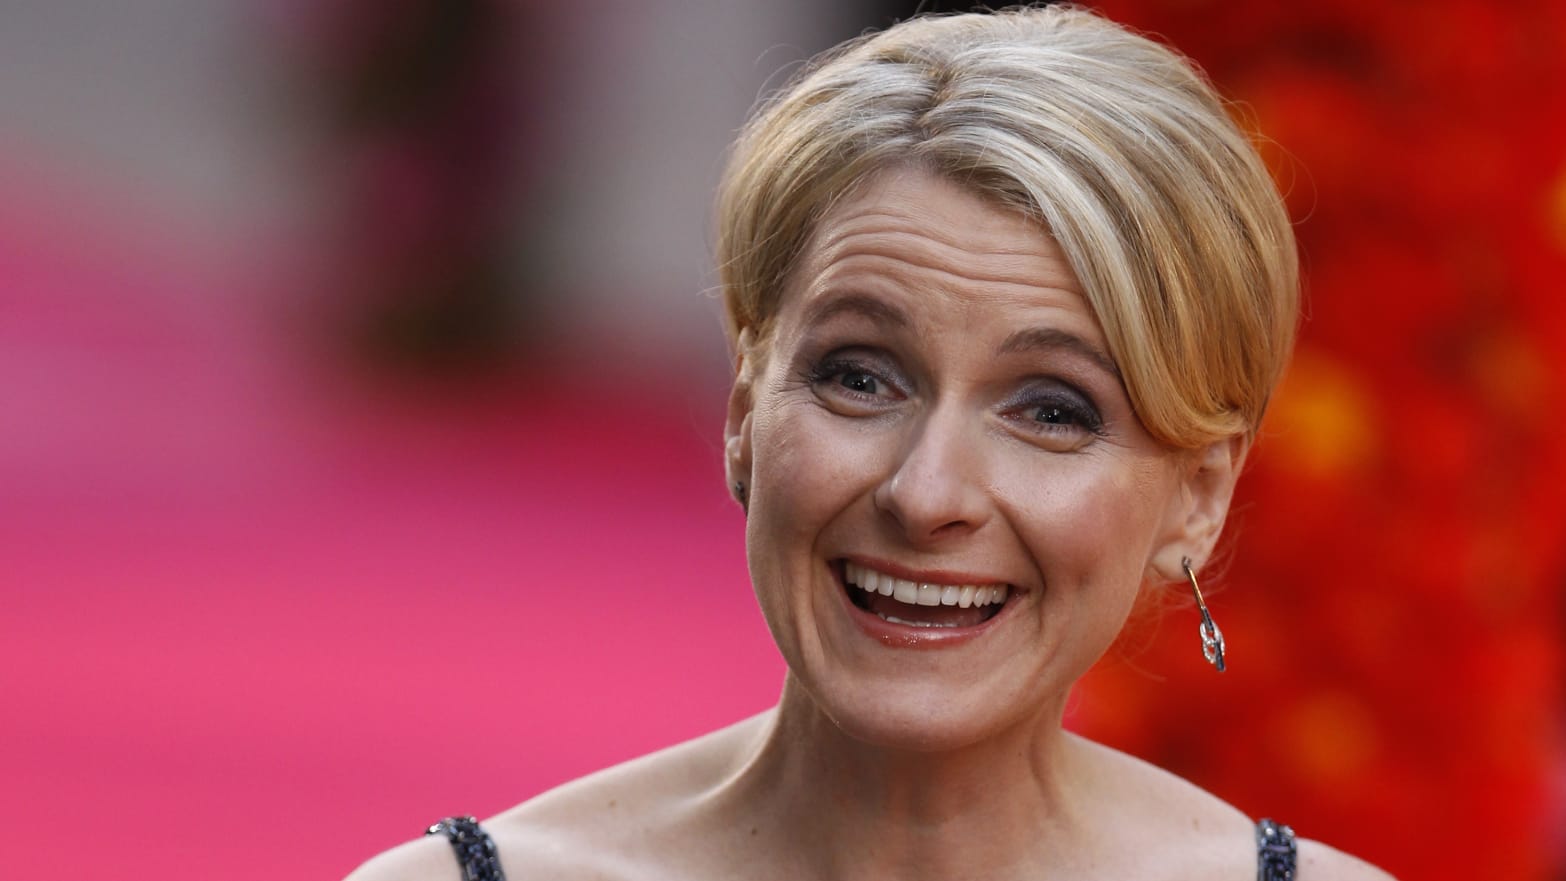 U.S. author Elizabeth Gilbert arrives for the British premiere of the film adaptation of her book.